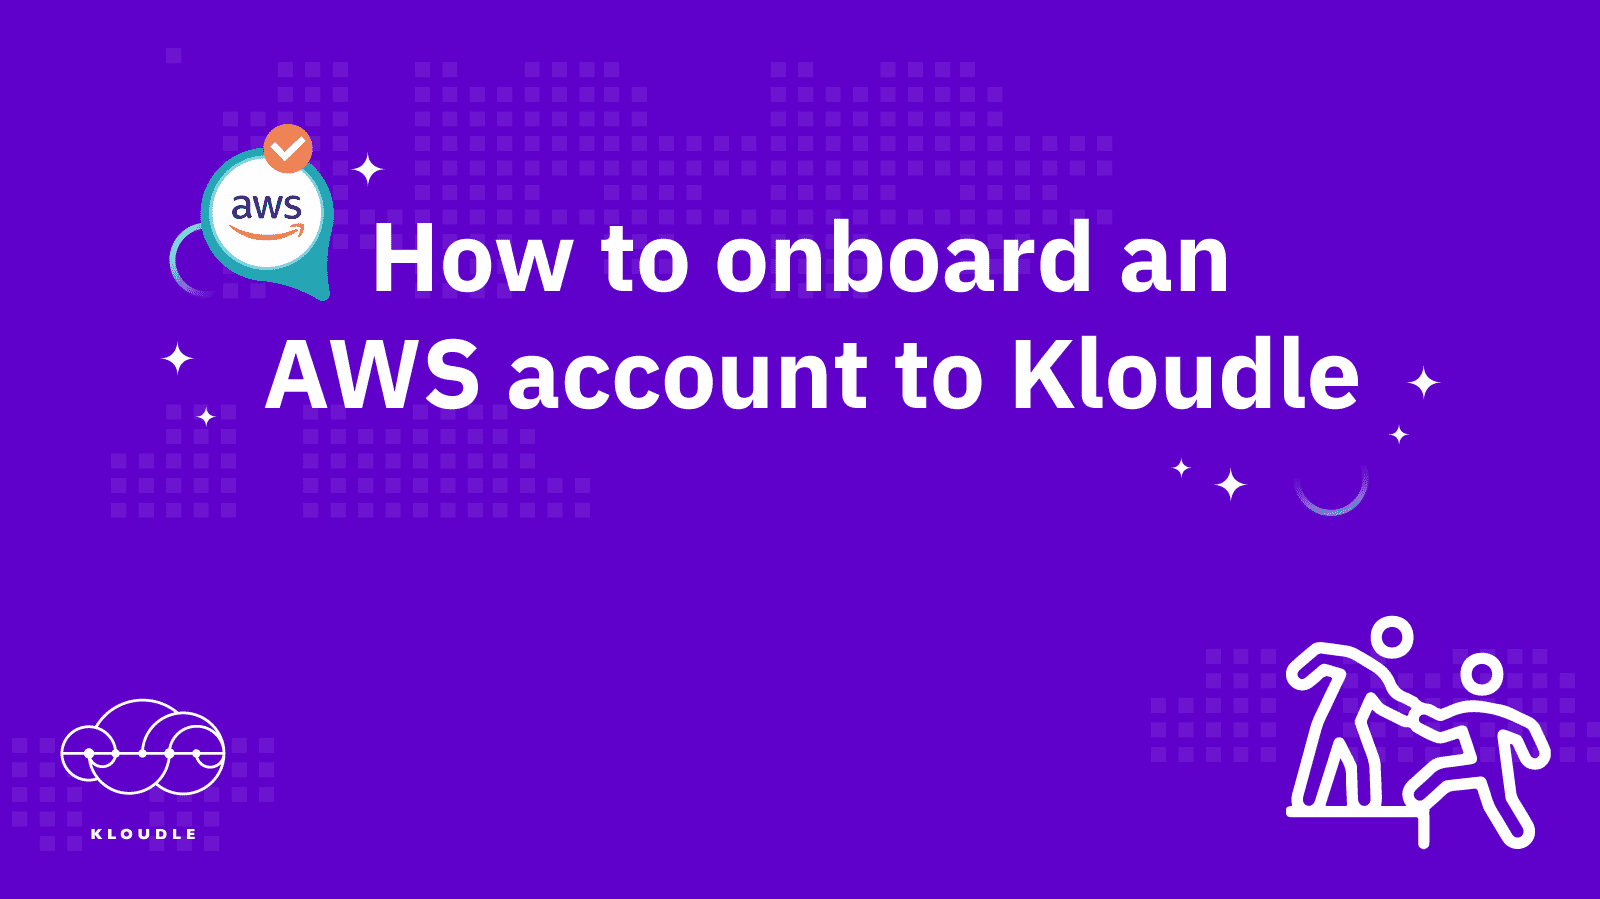 How to onboard an AWS account to Kloudle